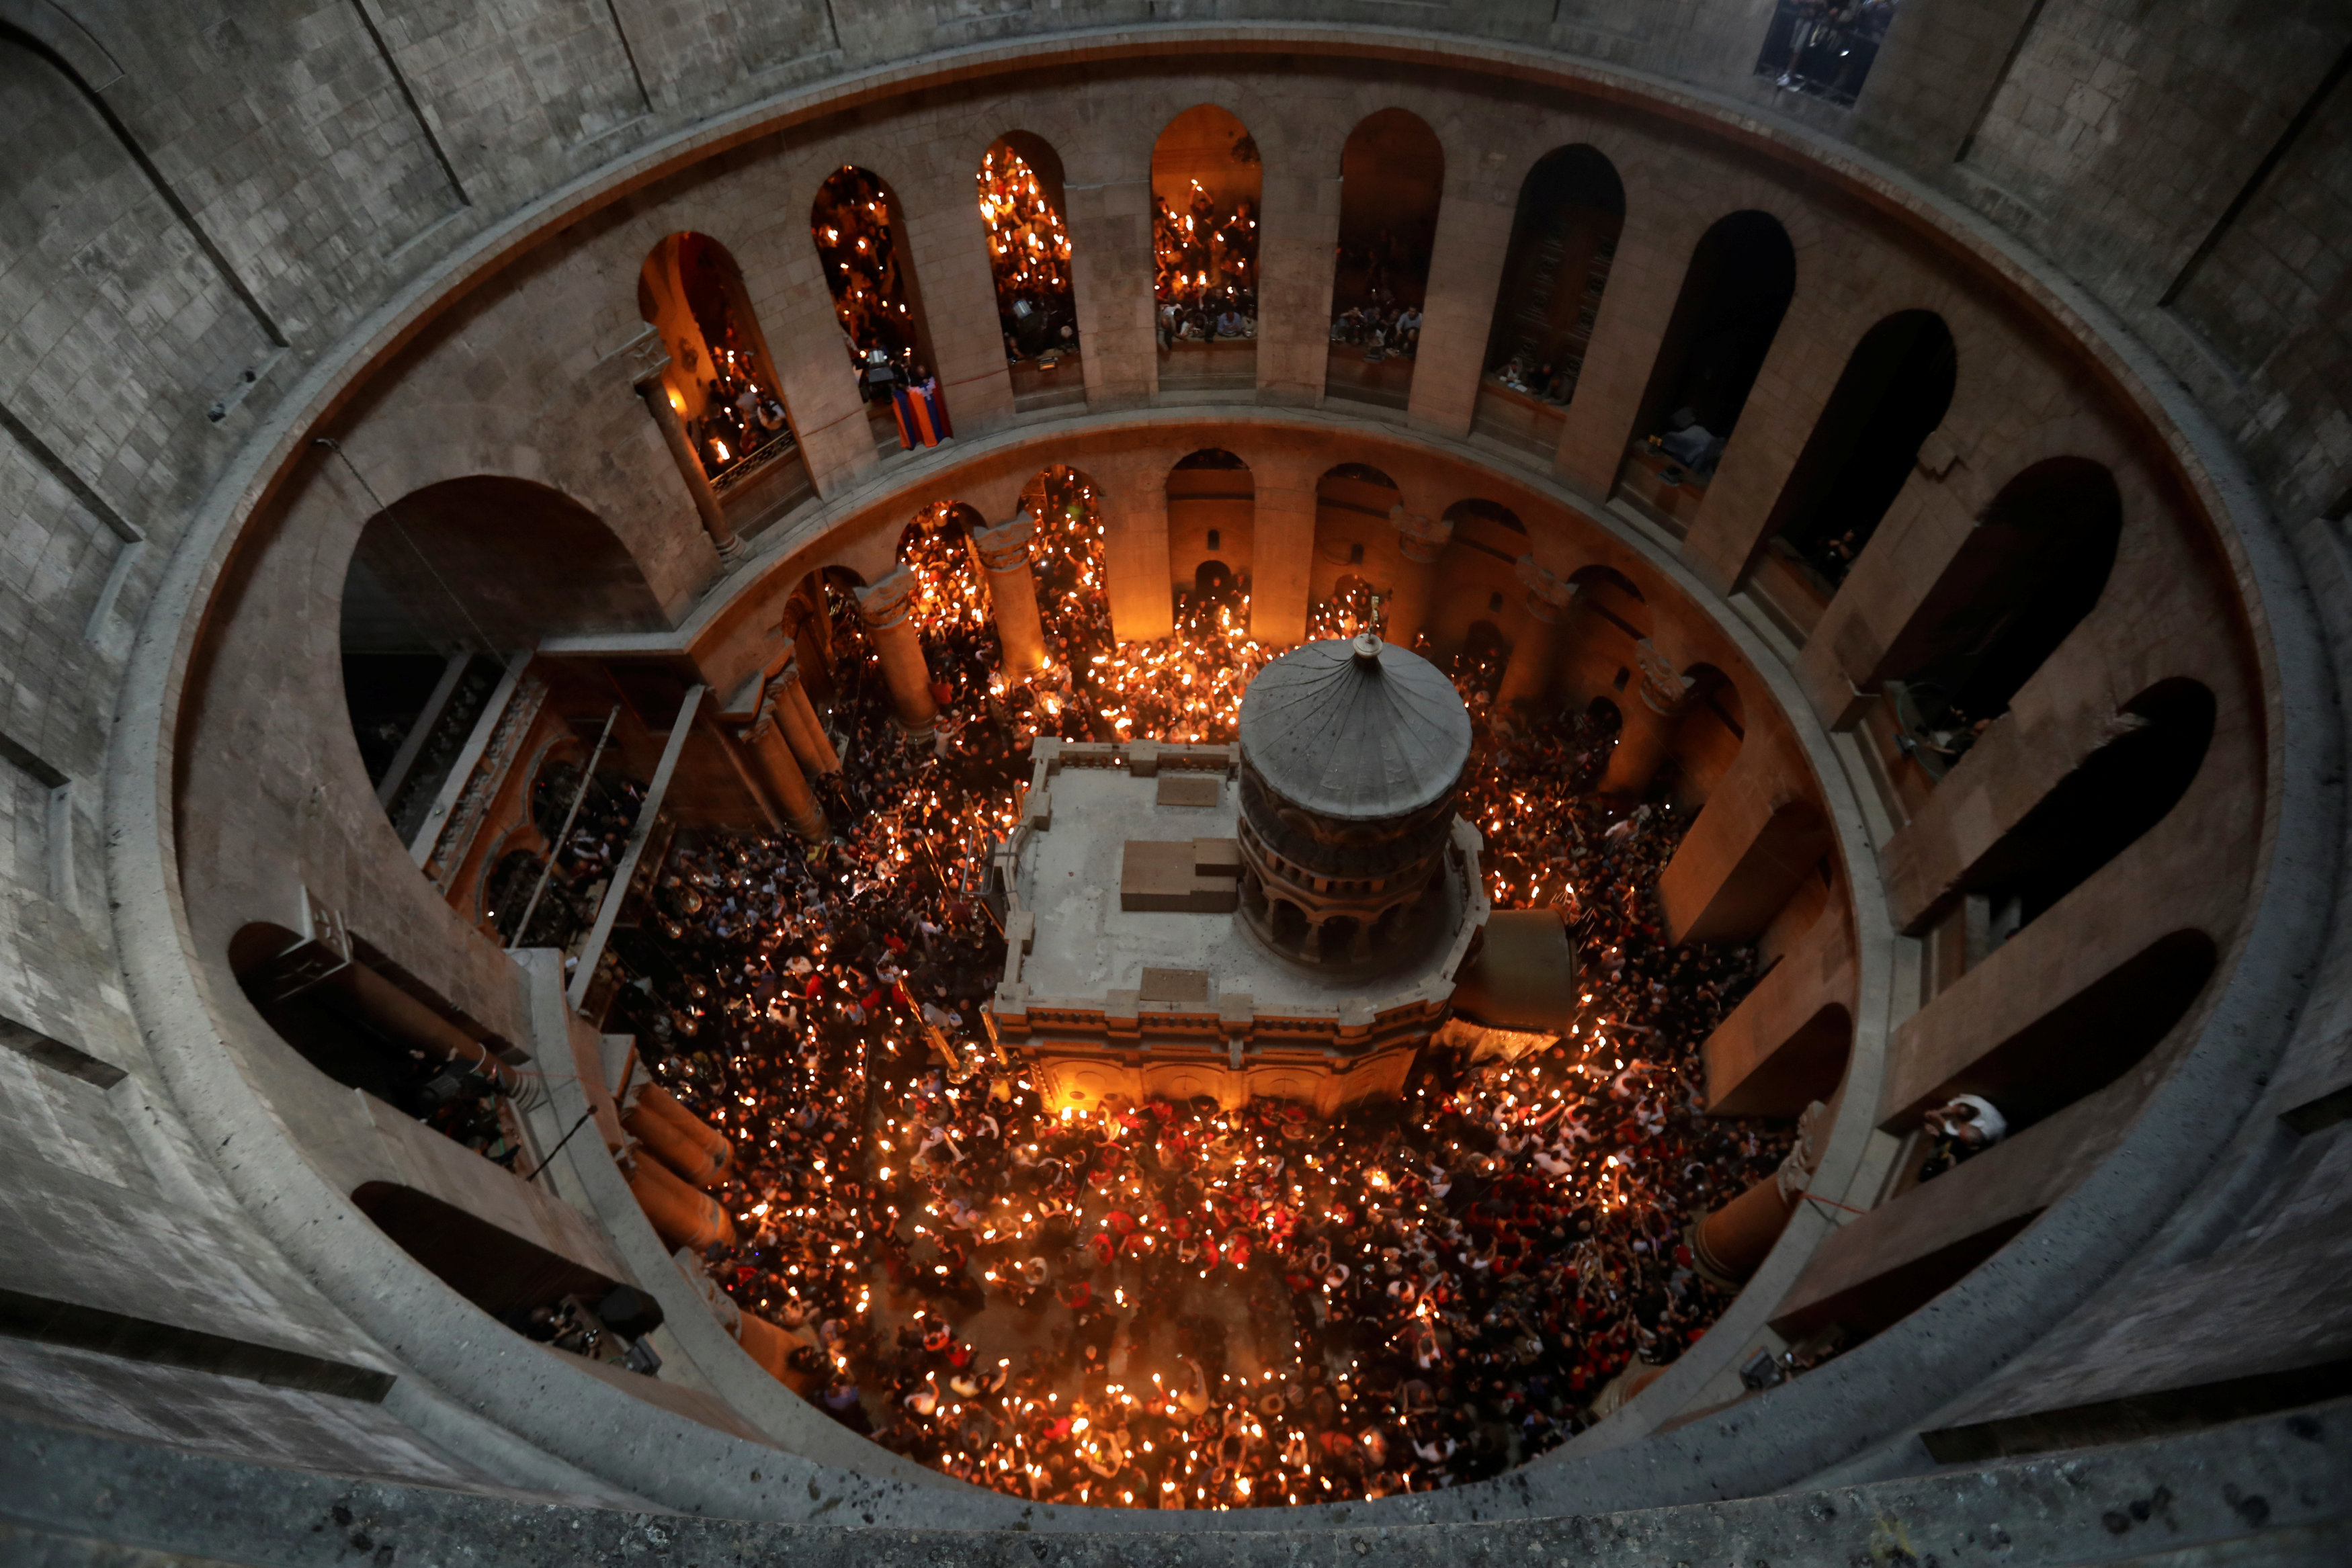 Worshippers hold candles as they take part in the Christian Orthodox Holy Fire ceremony at the Church of the Holy Sepulchre in Jerusalem's Old City. PHOTO: REUTERS